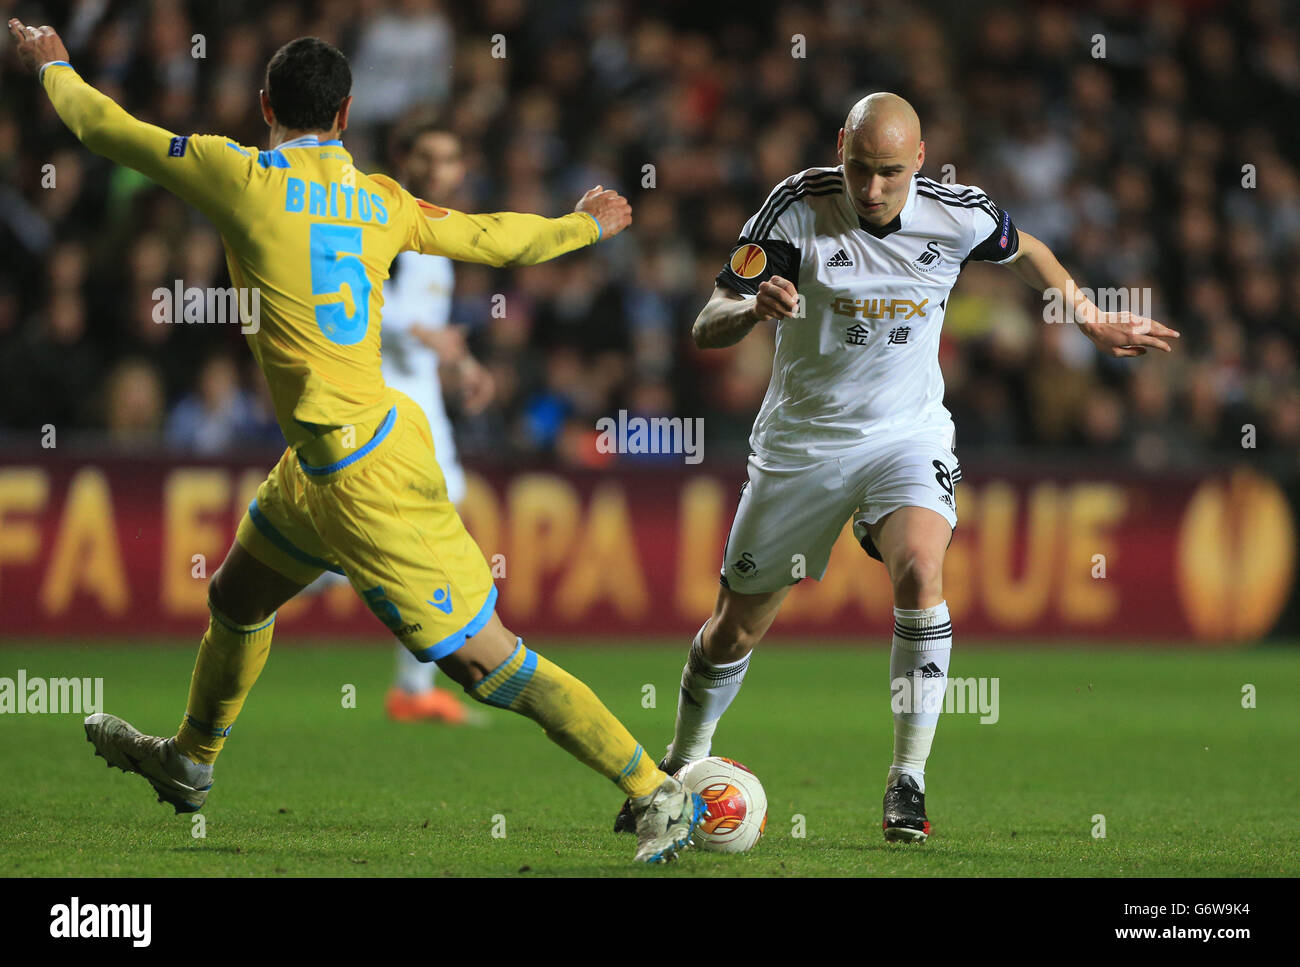 Swansea City's Jonjo Shelvey skips over tackle by Napoli's Miguel Britos during the UEFA Europa League, Round of 32 match at the Liberty Stadium, Swansea. Stock Photo